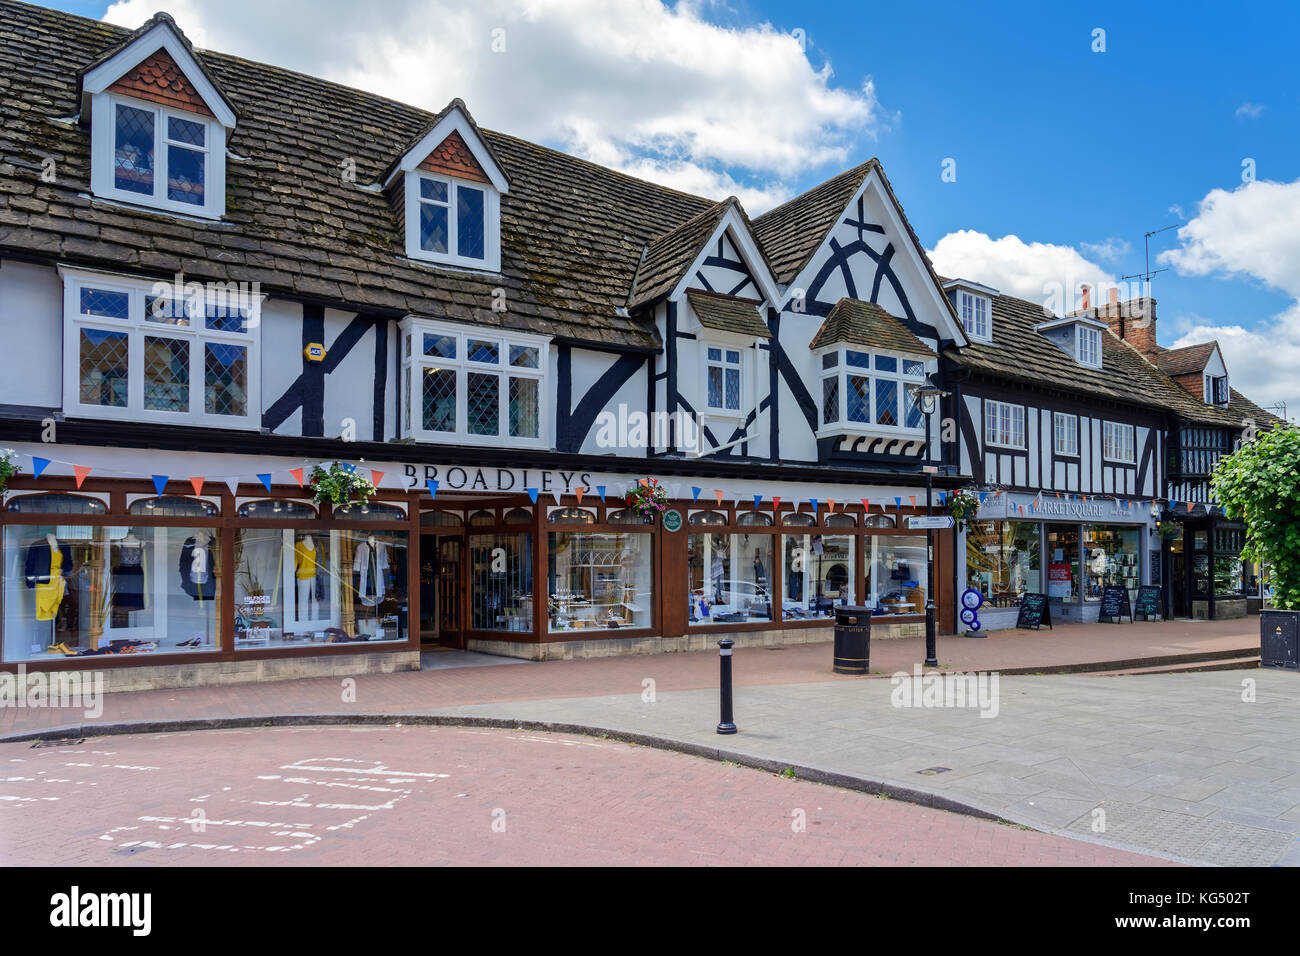 EAST GRINSTEAD, WEST SUSSEX/UK - JUNE 17 : View of the High Street in East Grinstead on June 17, 2017 Stock Photo